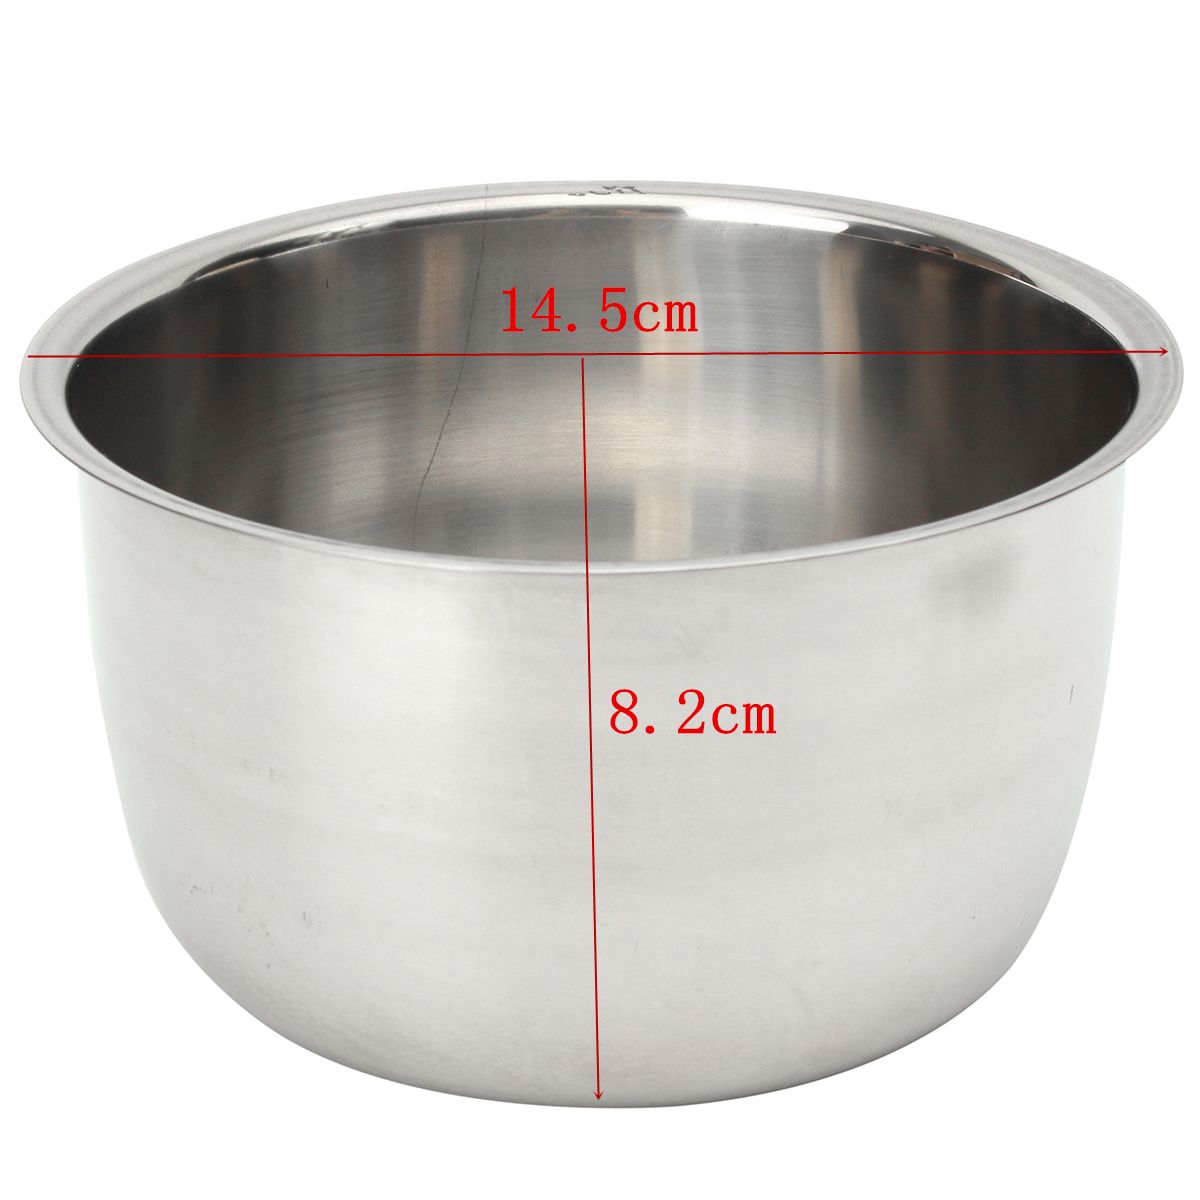 13L-Electric-Portable-Lunch-Box-Rice-Cooker-Steamer-2-Layer-Stainless-Steel-Container-Food-1179956